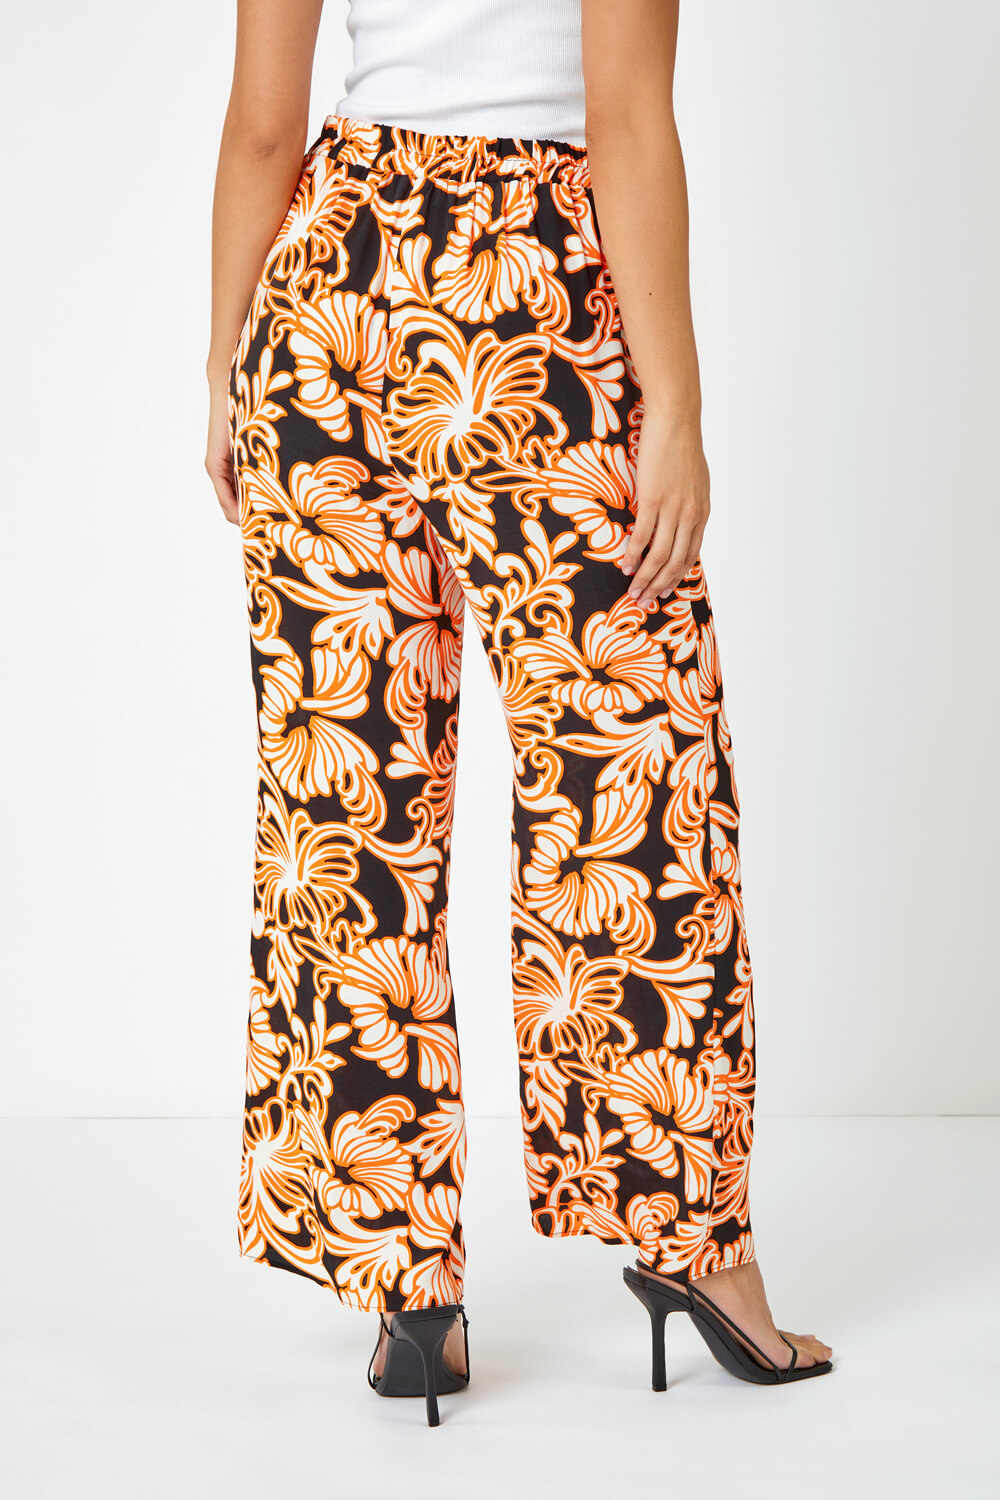 Black Floral Wide Leg Trousers, Image 3 of 5